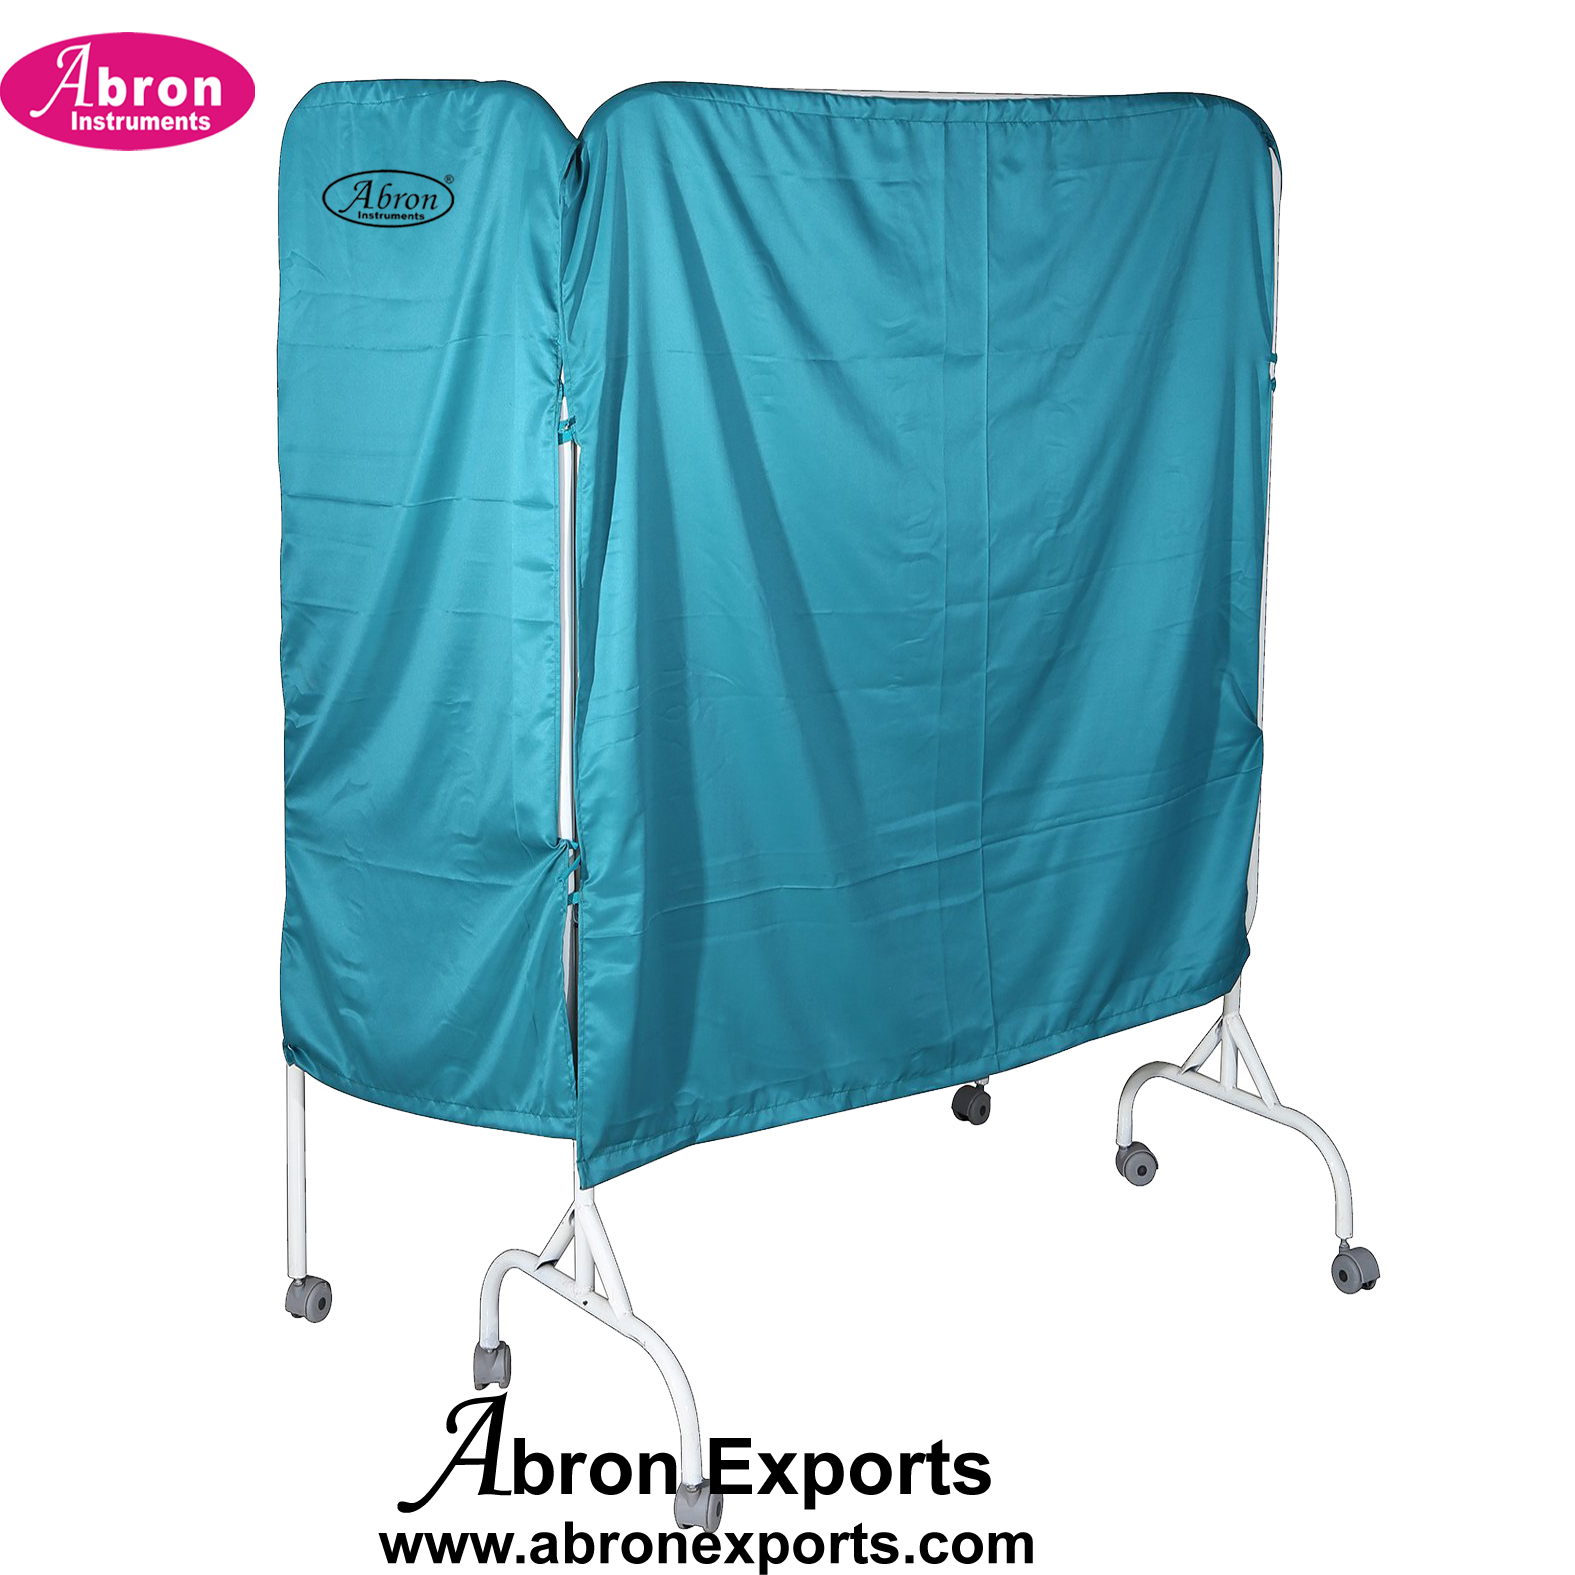 Hospital Medical bedside screens 3 four x2 and 4 feet partion with curtons steel frame with wheels Abron ABM-2355-S3PA